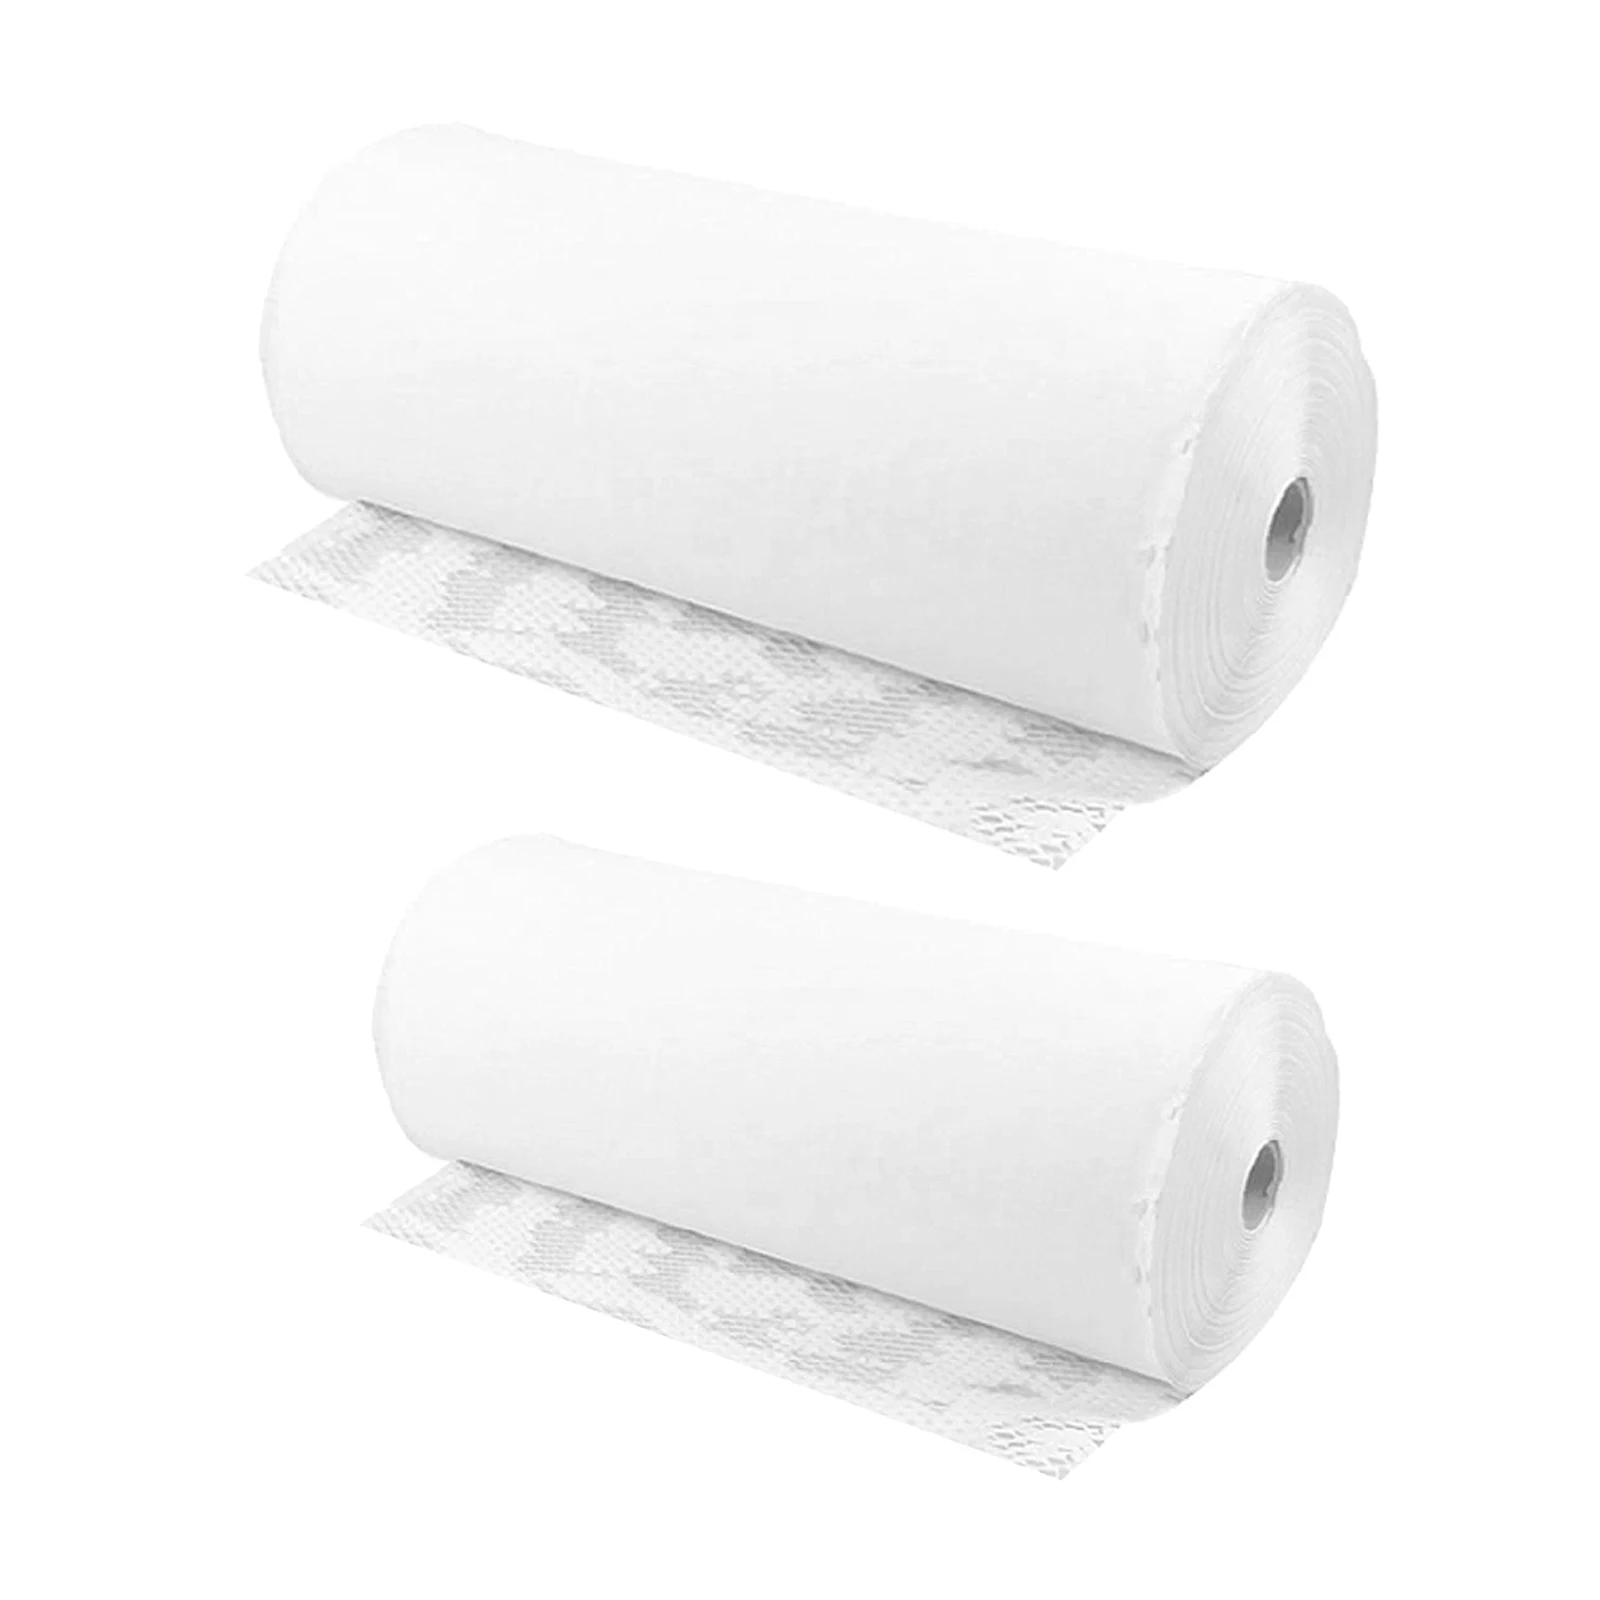 Ready Roll Protective Paper, Eco-friendly Honeycomb Cushioning Wrap Roll Perforated-Packing, for Gift Packing & Moving